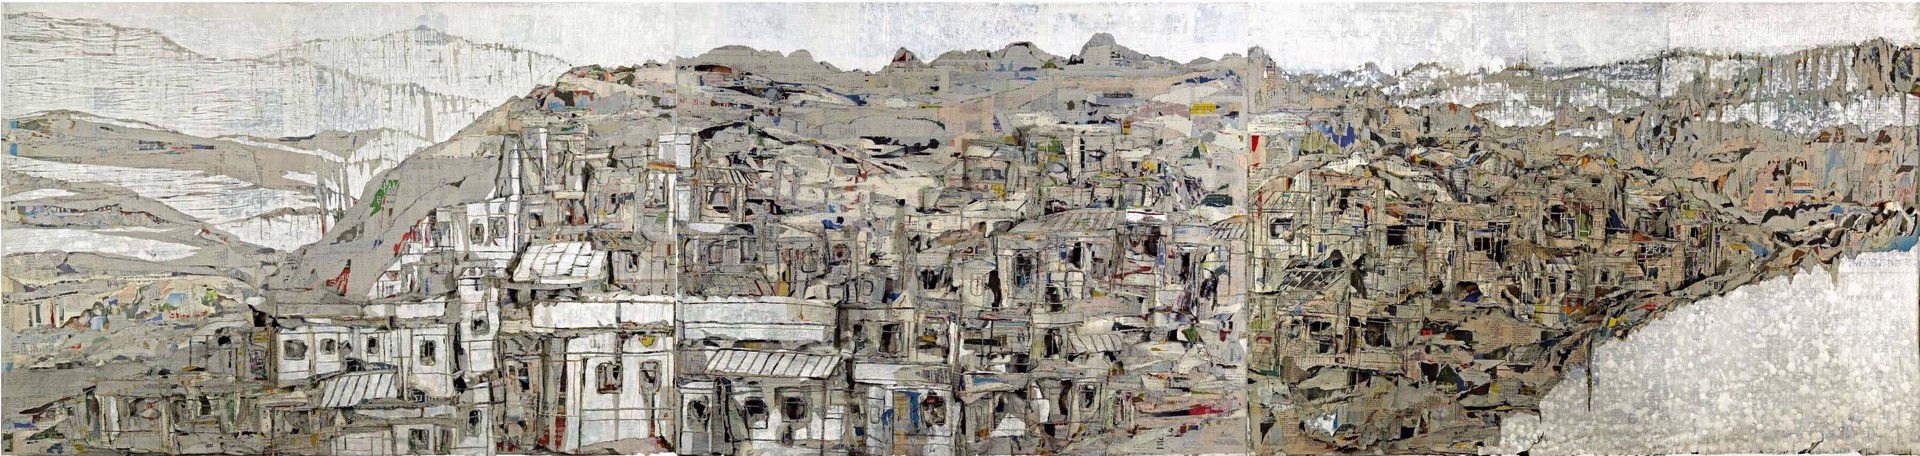 Panorama of the Village by Yeji Moon